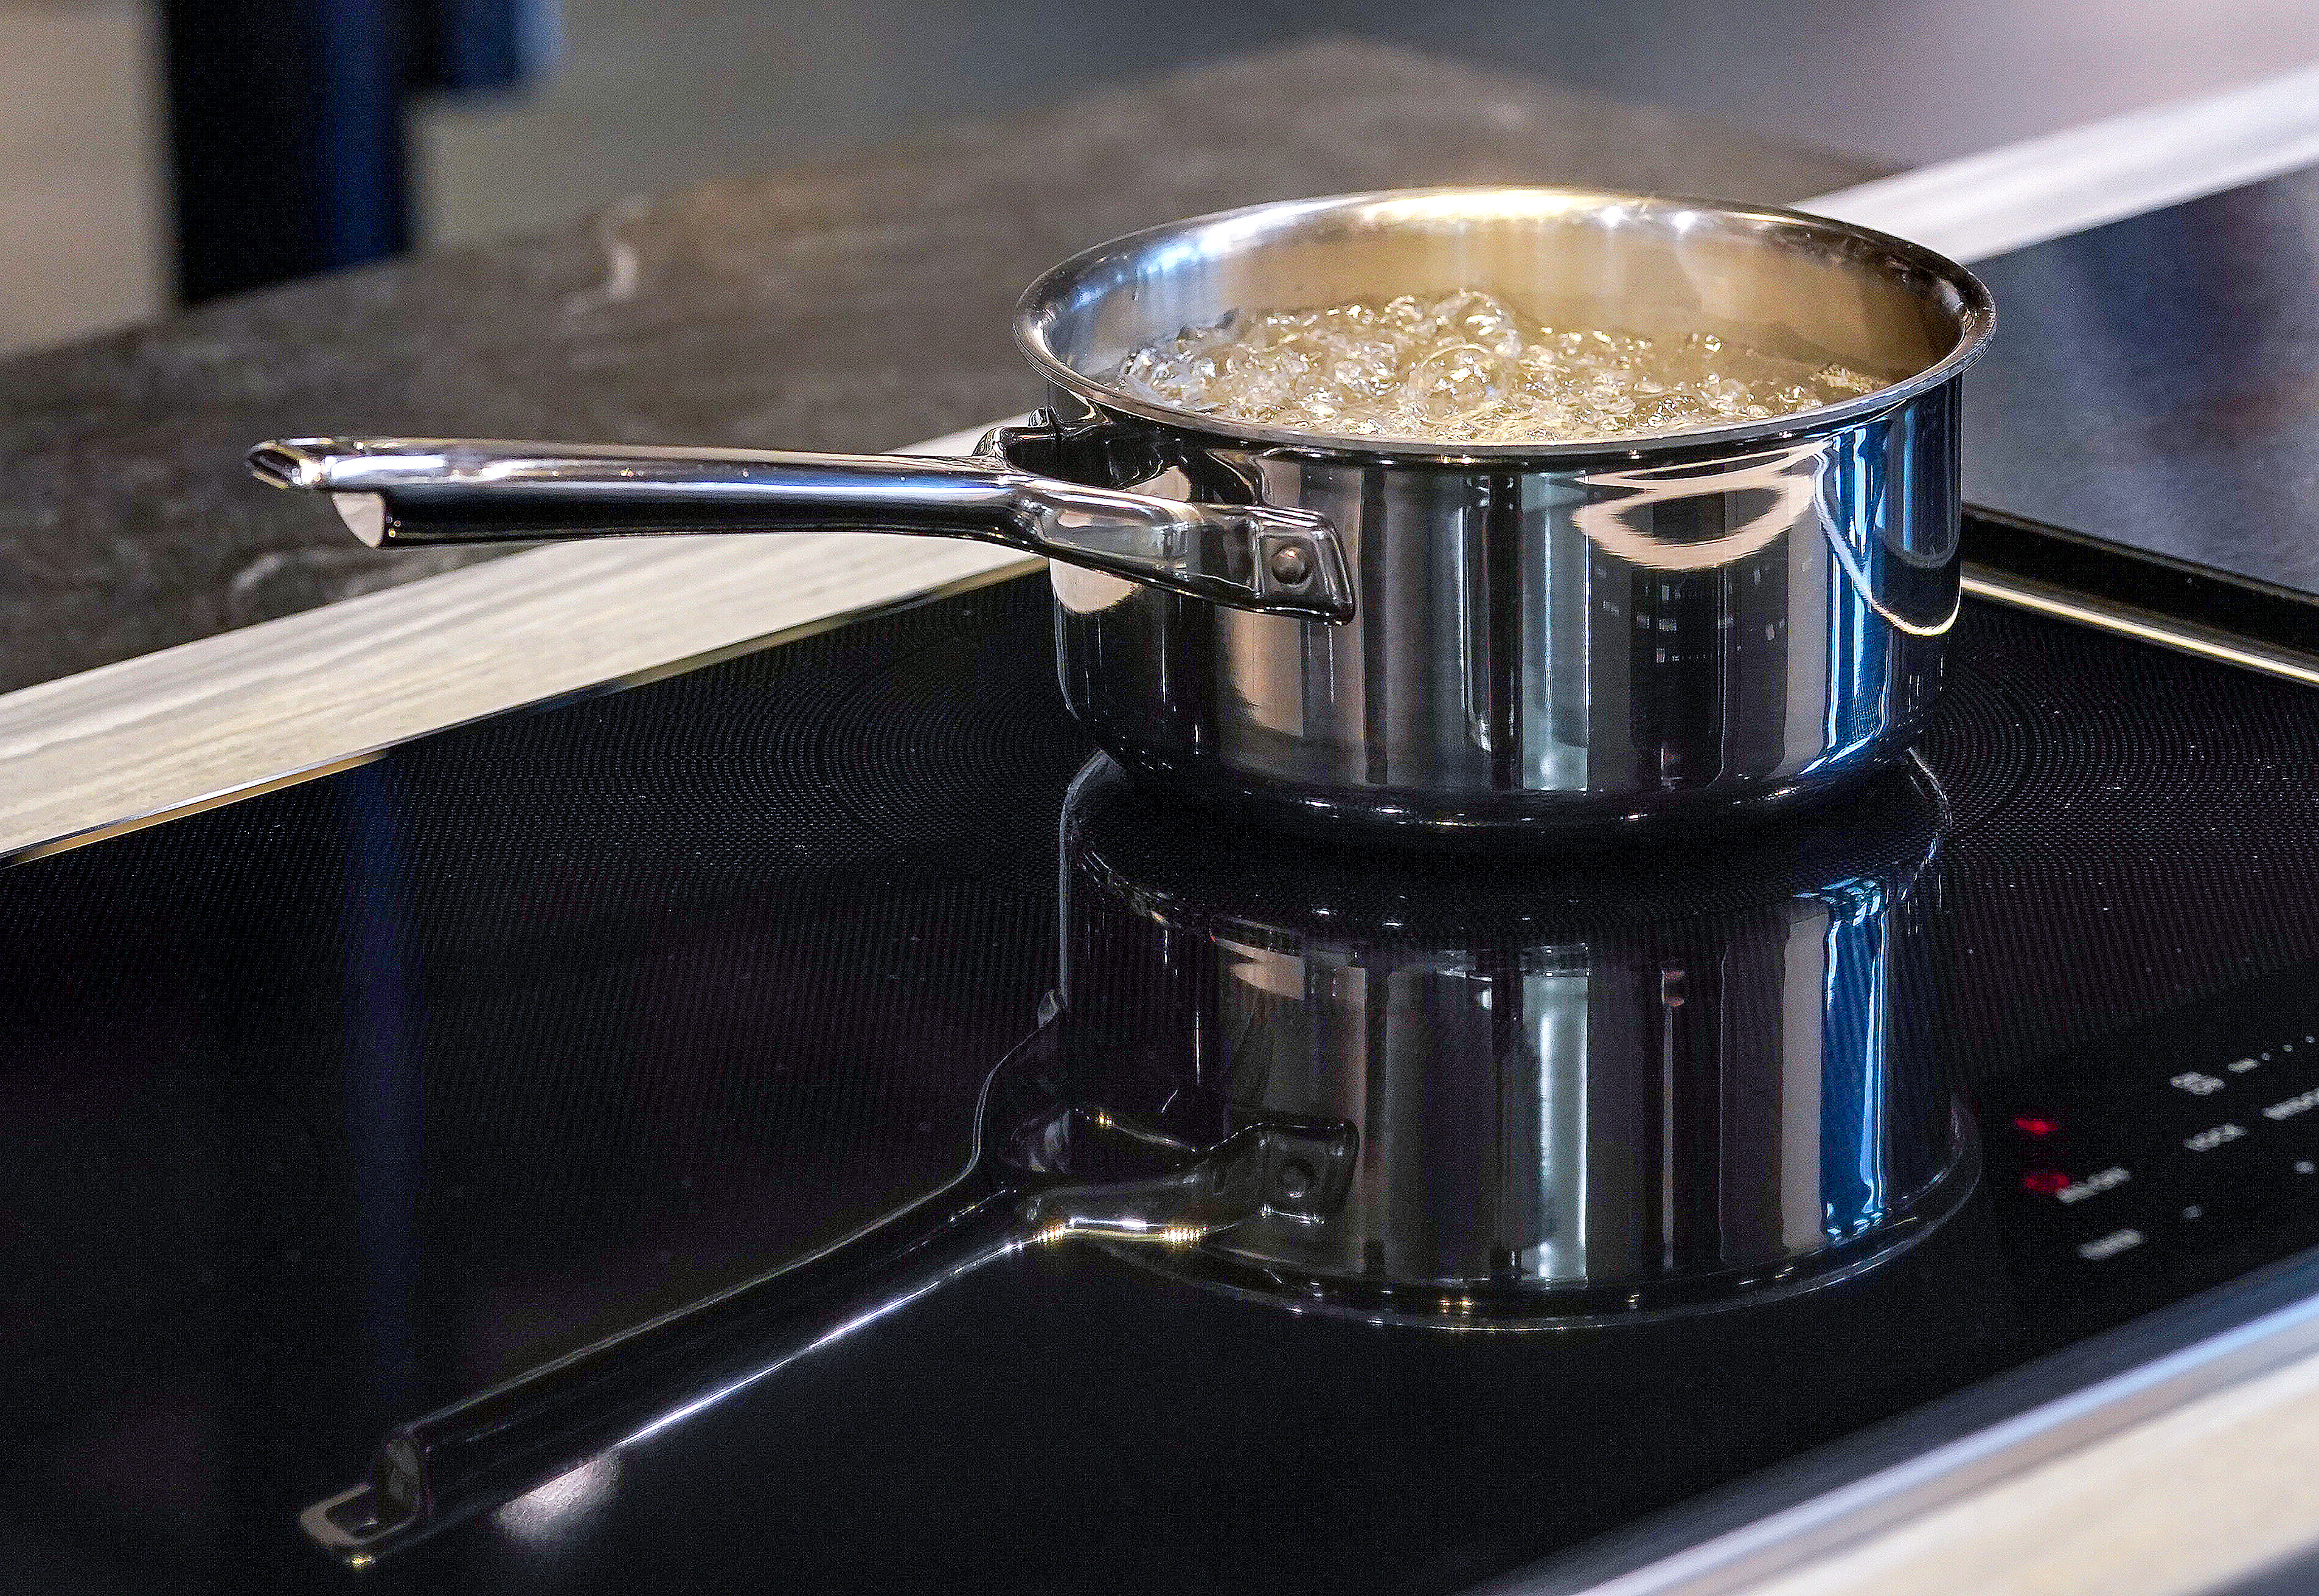 Induction Cooktops: Why I Ditched Gas - Going Zero Waste